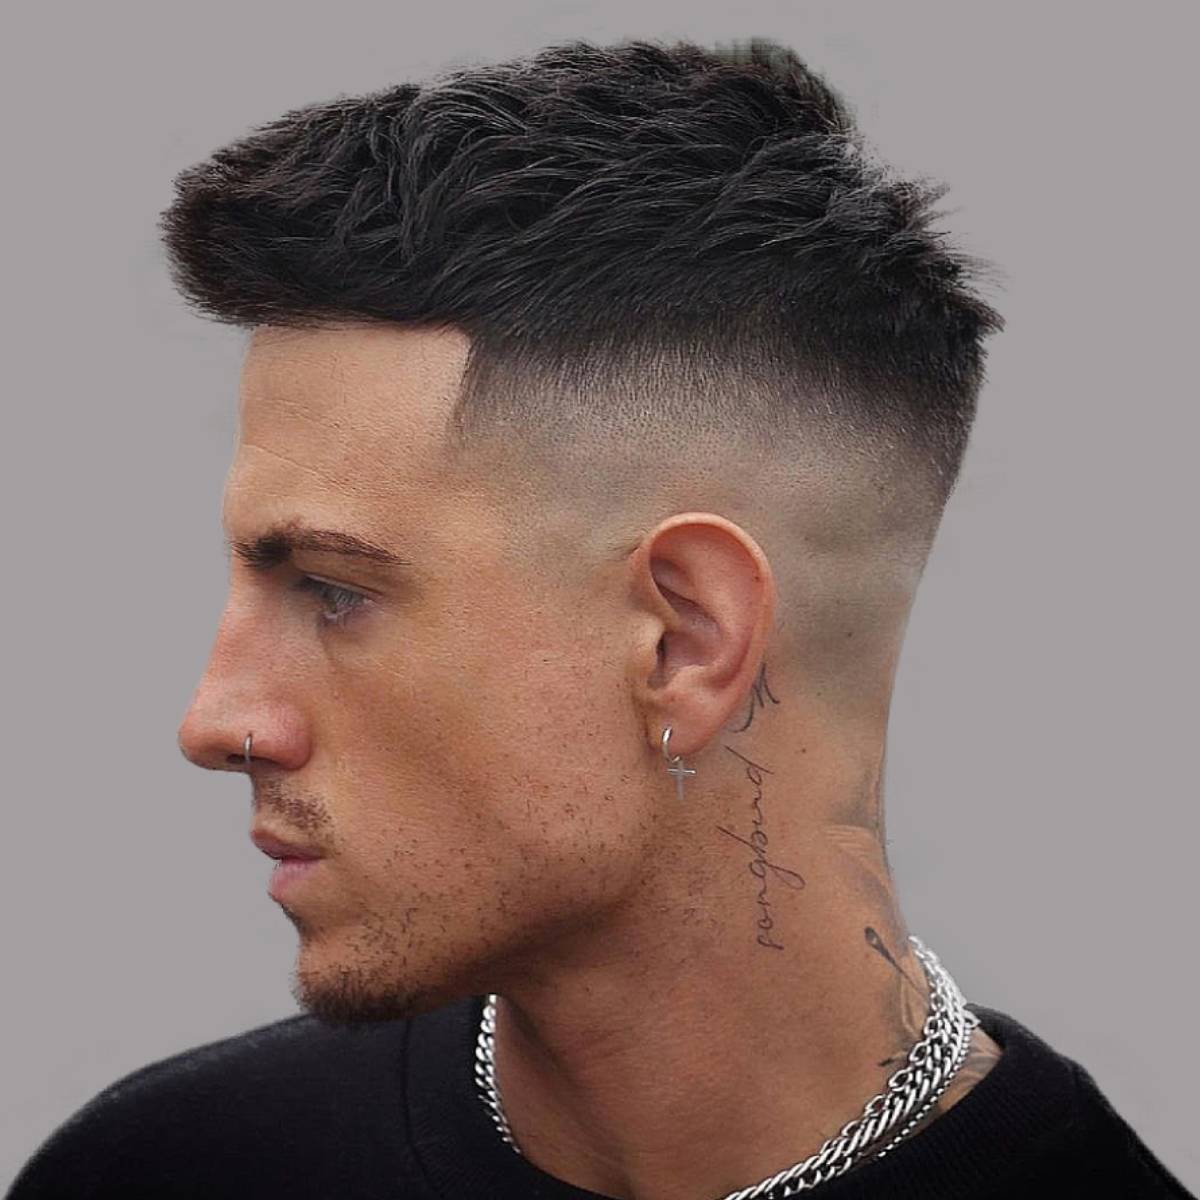 100 Best Men's Haircuts & Hairstyles in 2023 - The Trend Spotter